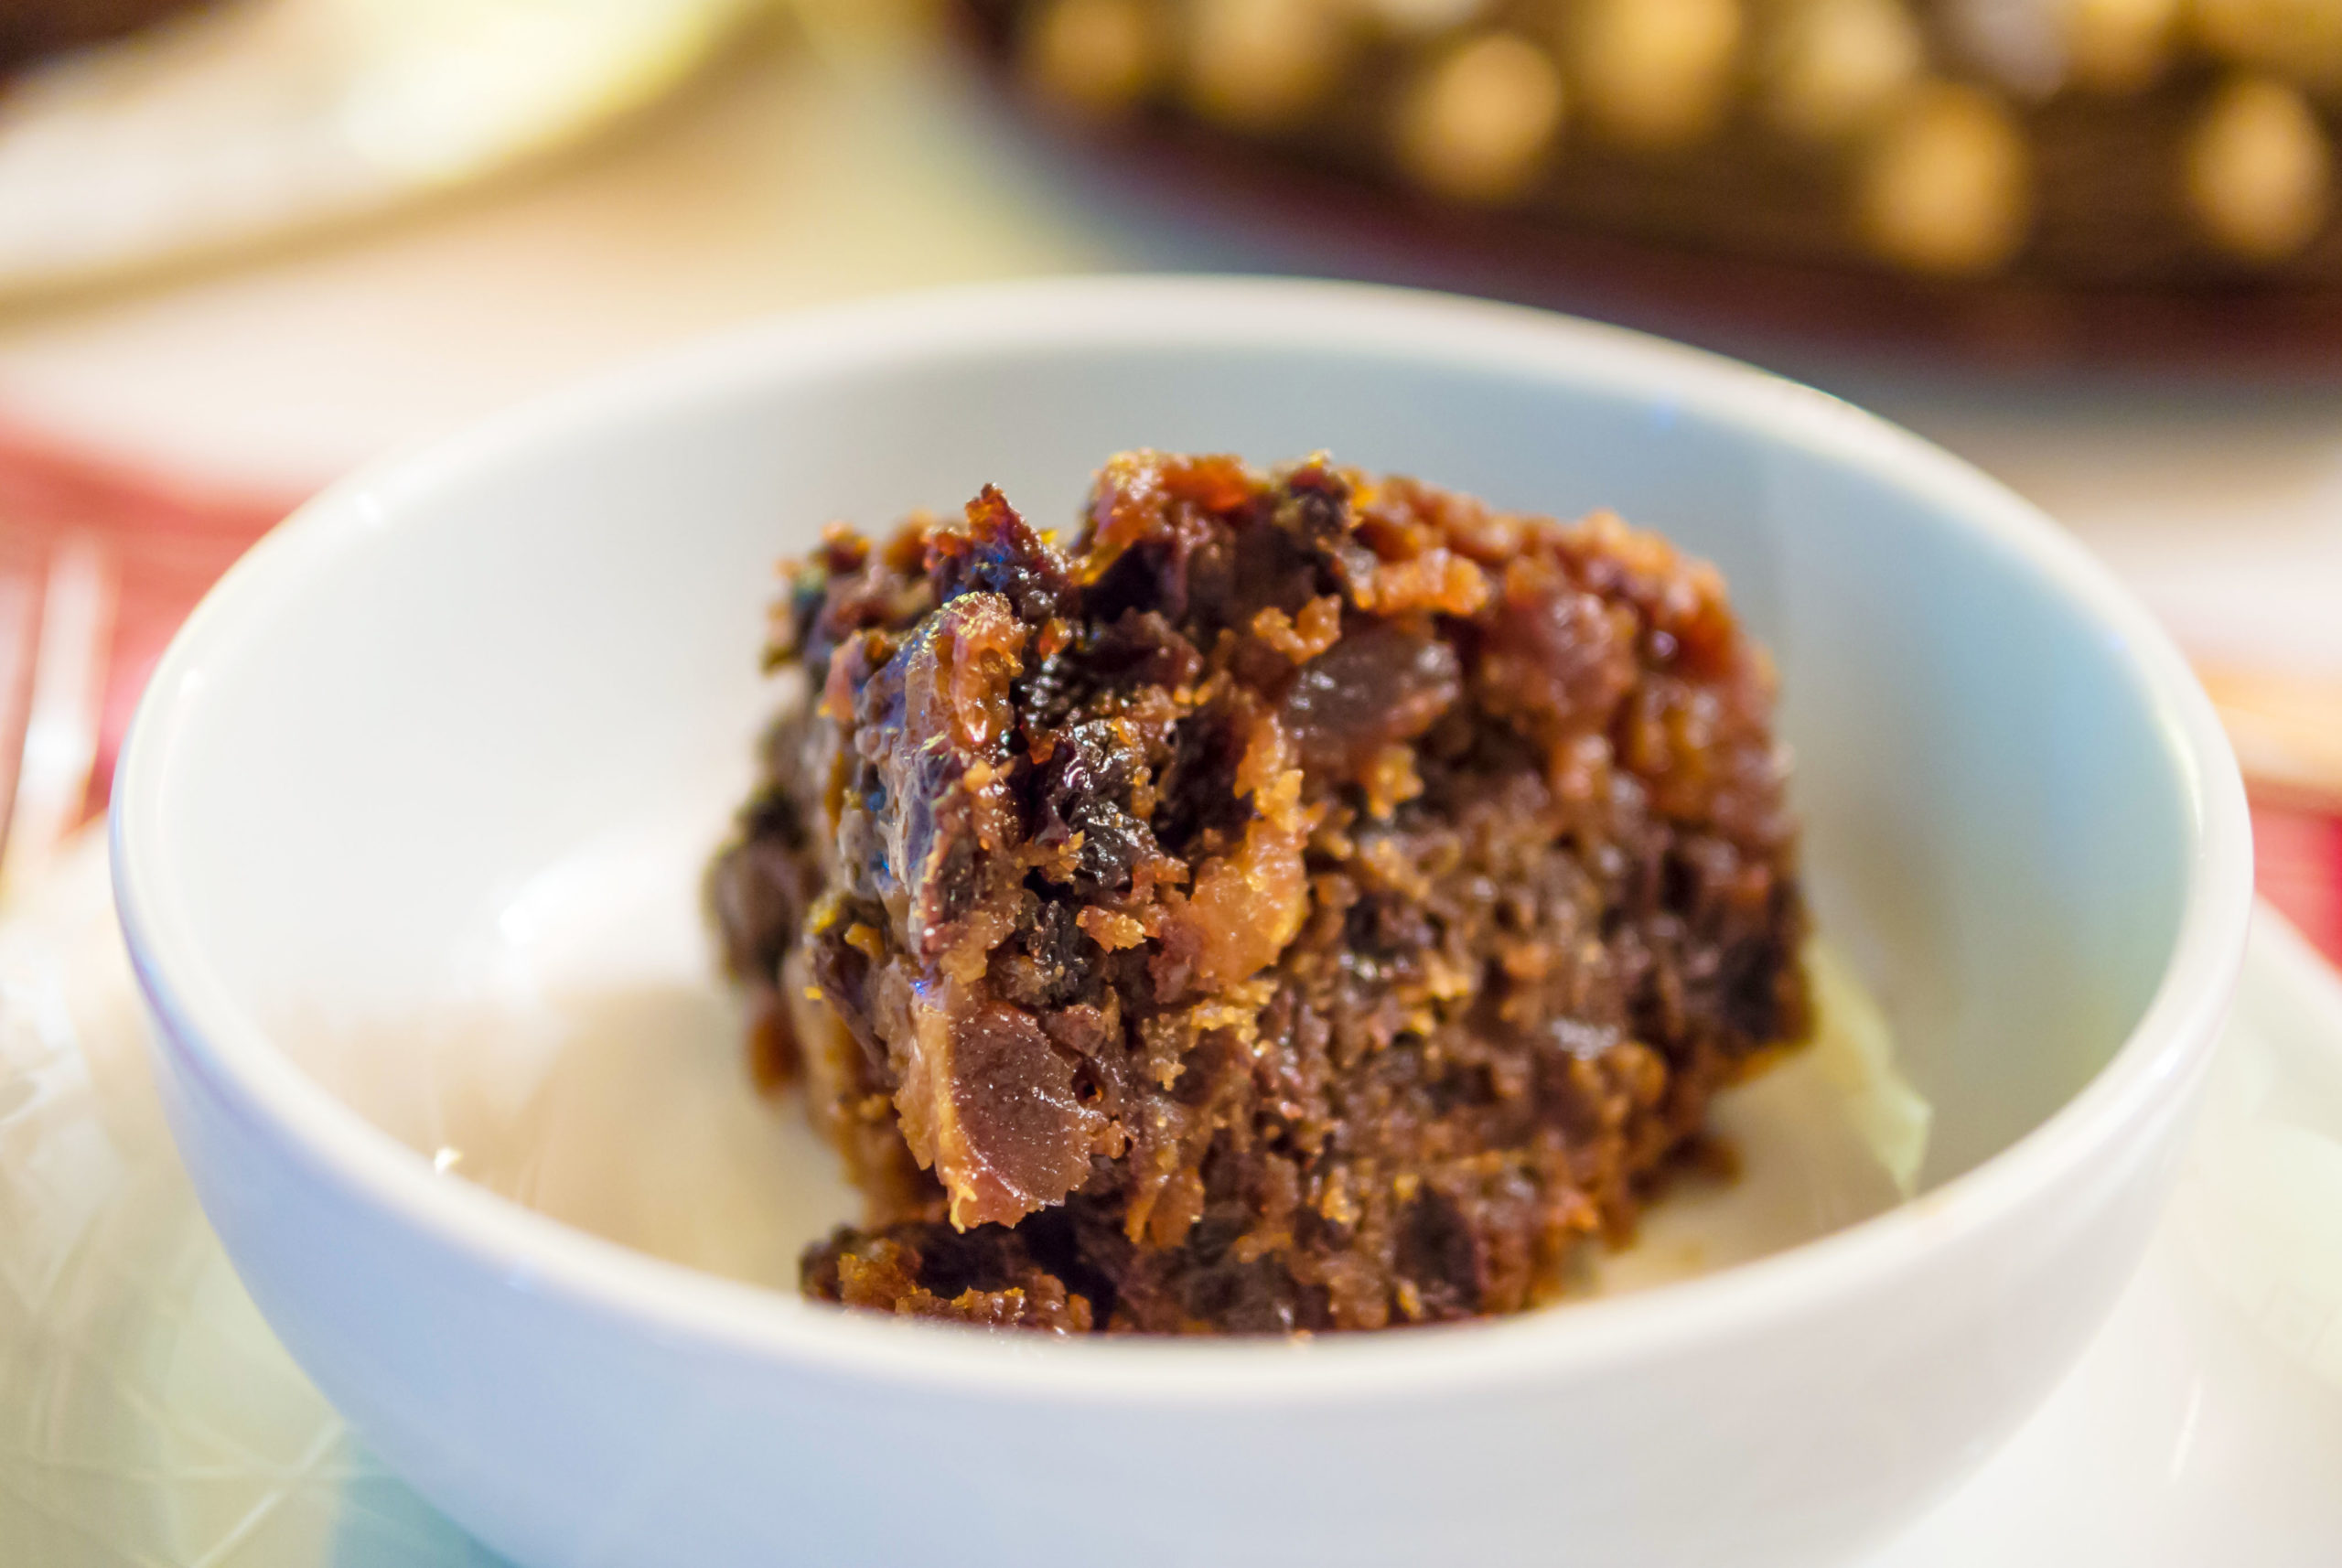 Christmas pudding © James Petts - licence [CC BY-SA 2.0] from Wikimedia Commons